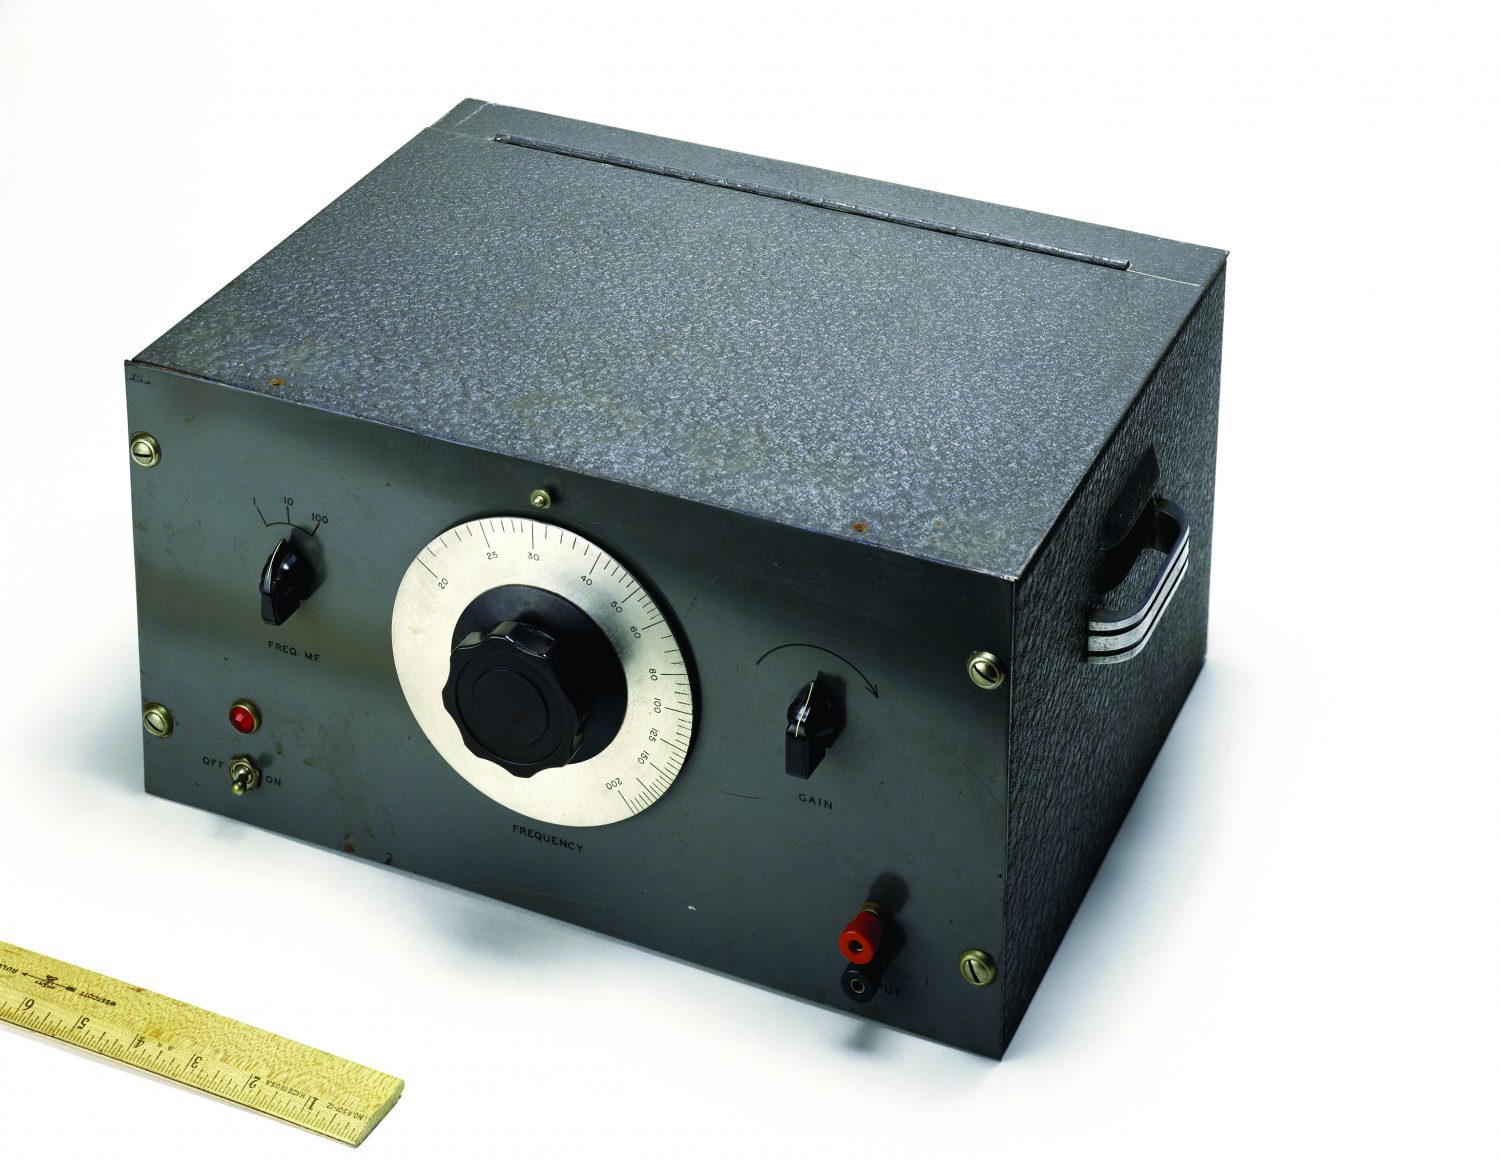 The HP 200A audio oscillator prototype developed by Bill Hewlett at Stanford.